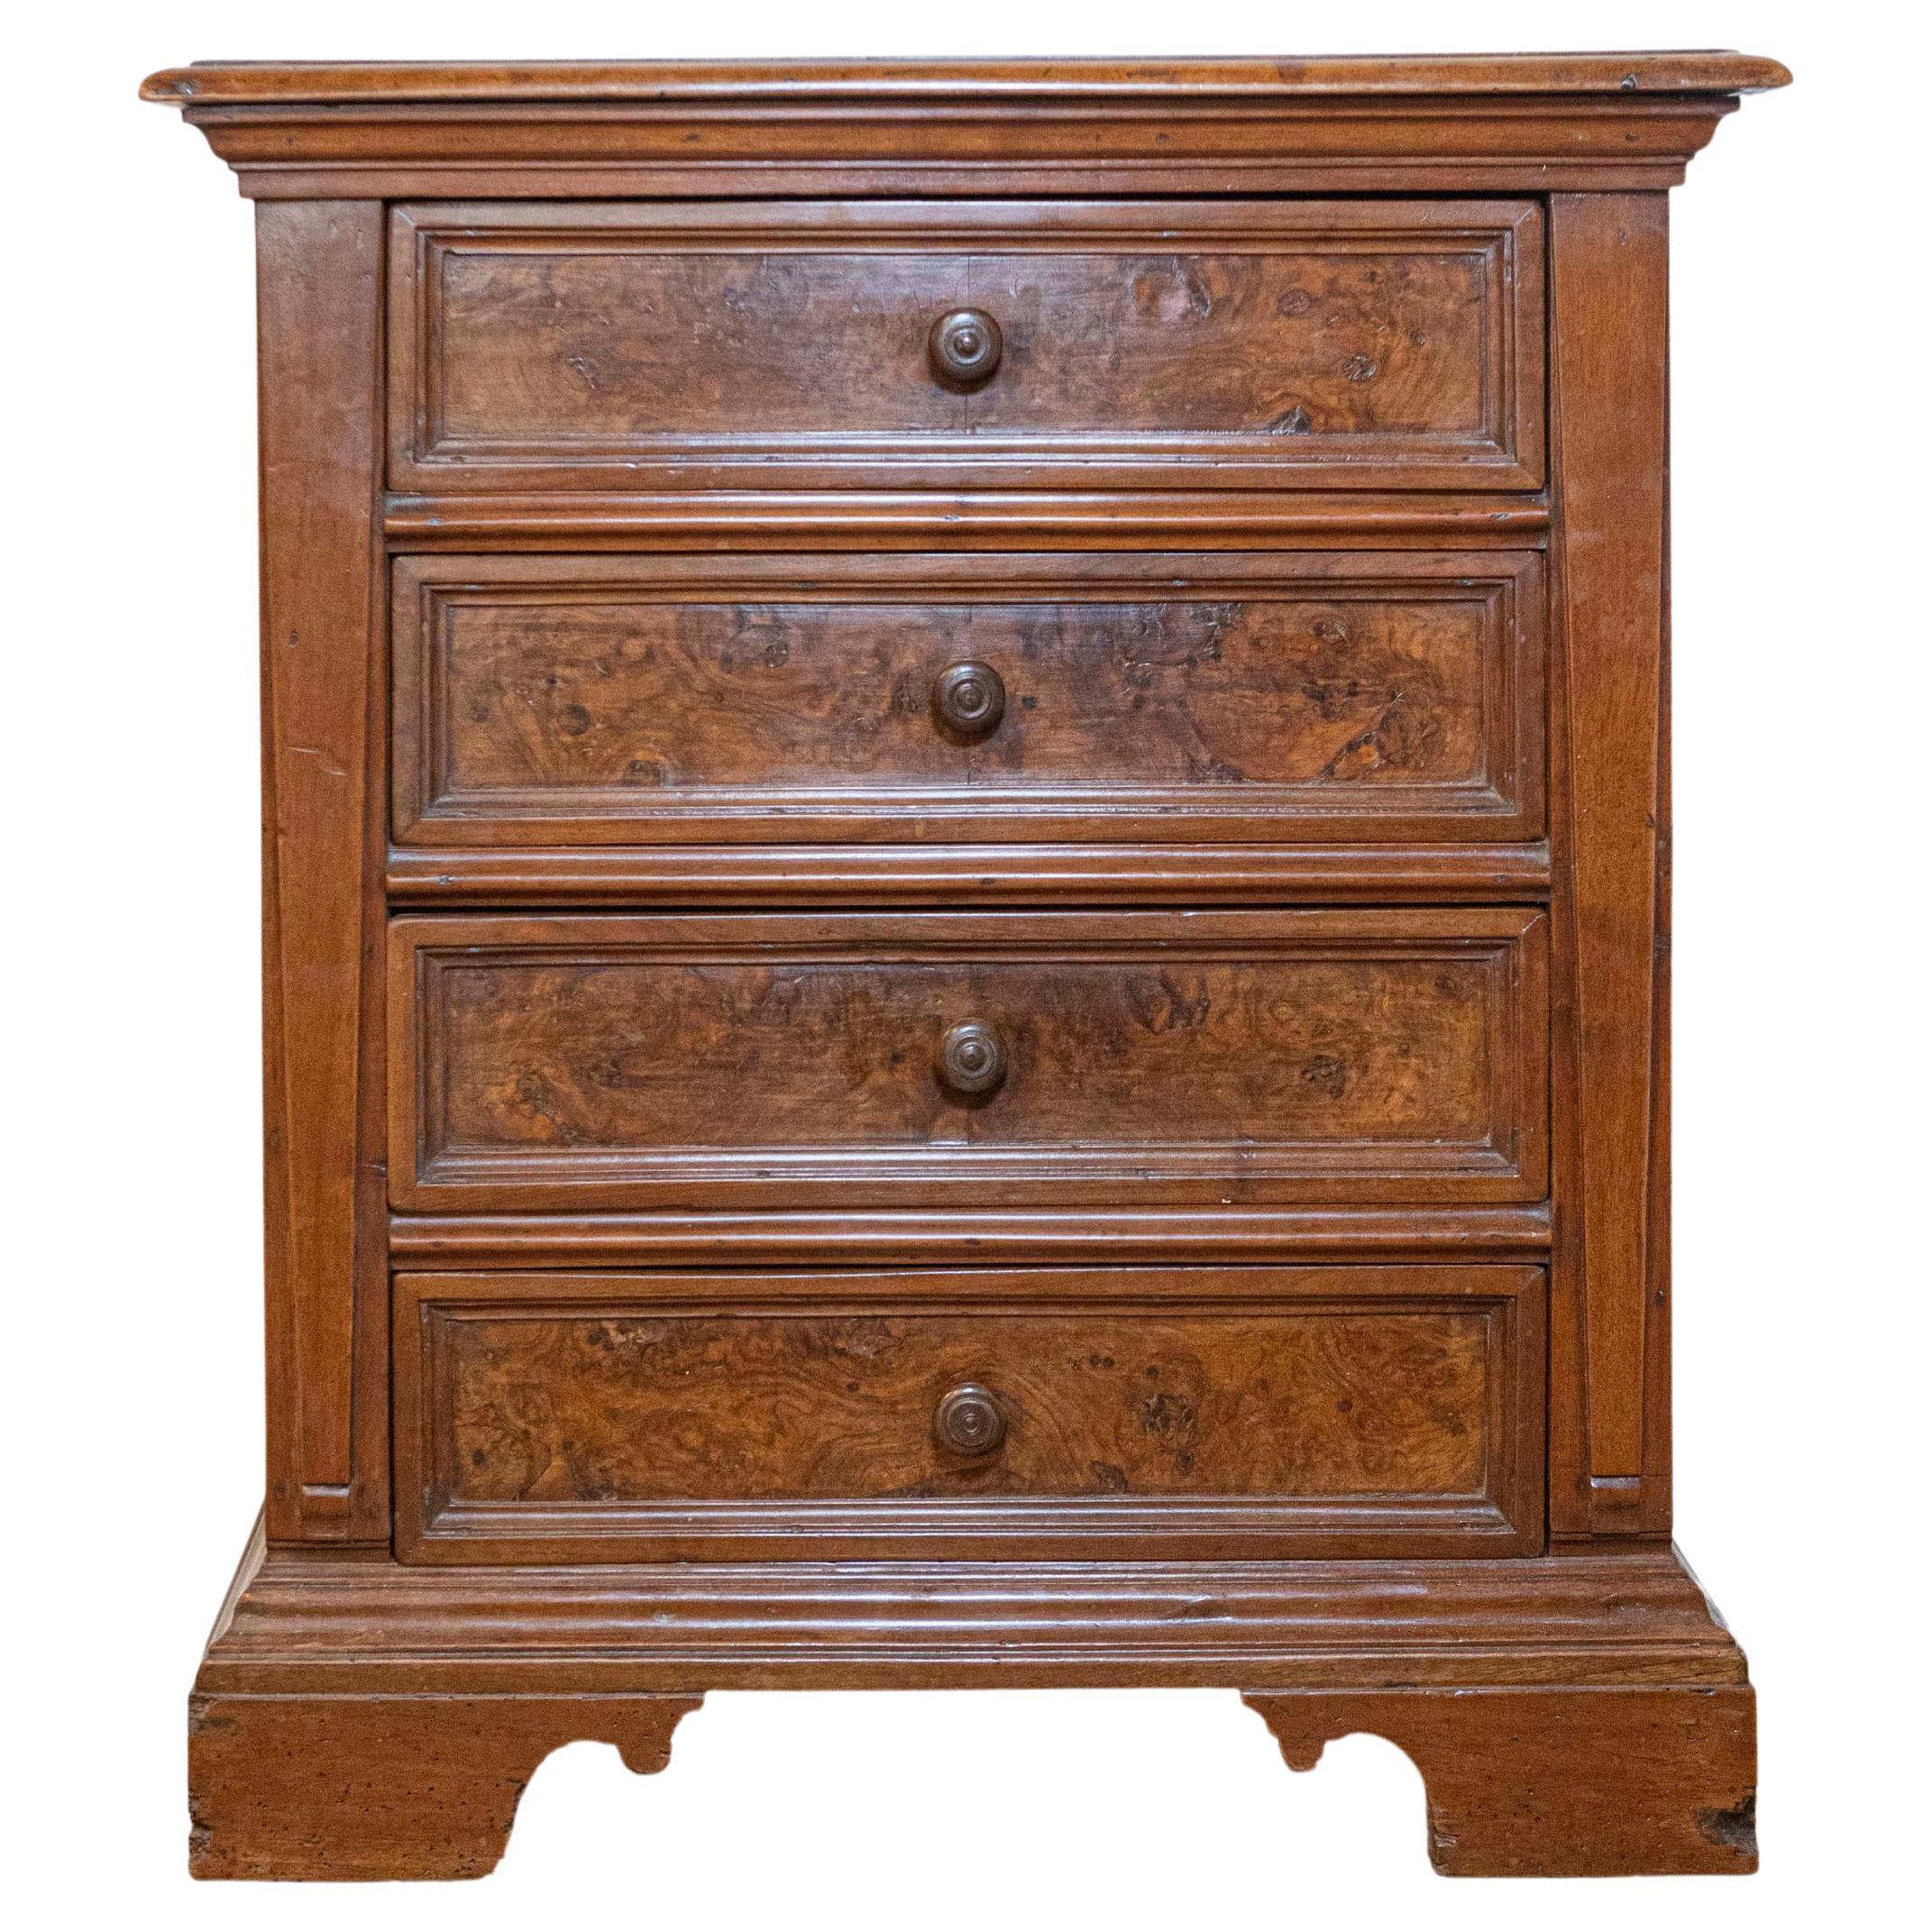 Italian 1840s Bedside Chest with Four Drawers, Burl Panels and Bracket Feet For Sale